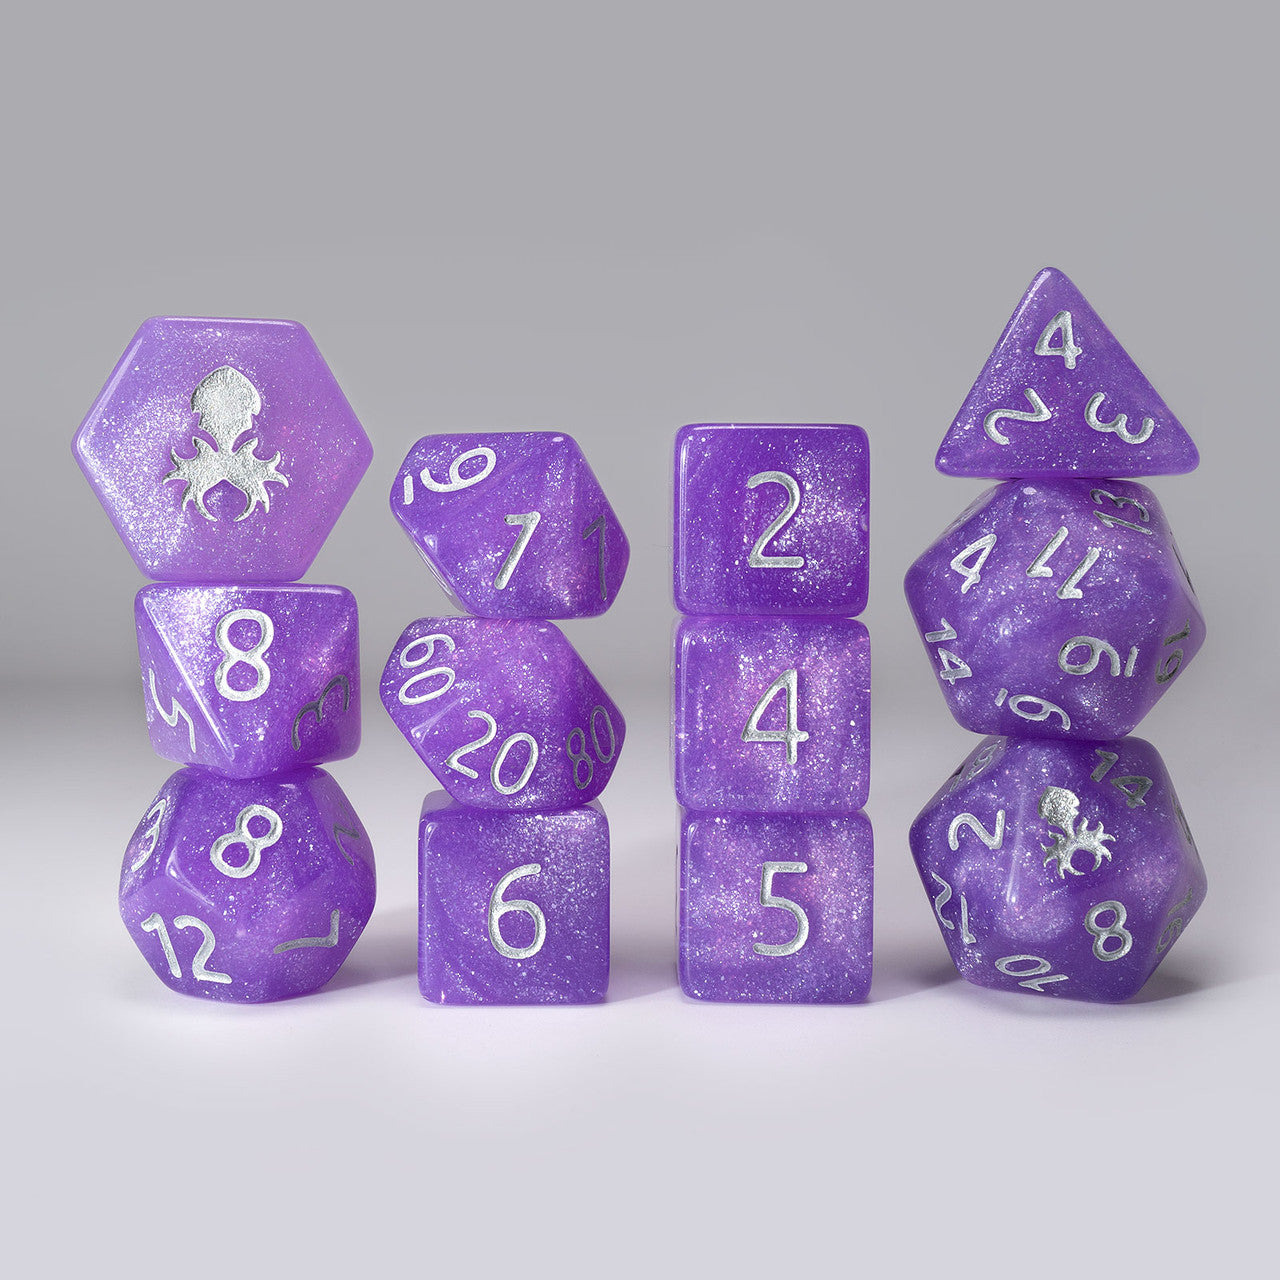 Team Purple Glitter Dice 12pc RPG Dice Set with Silver Ink